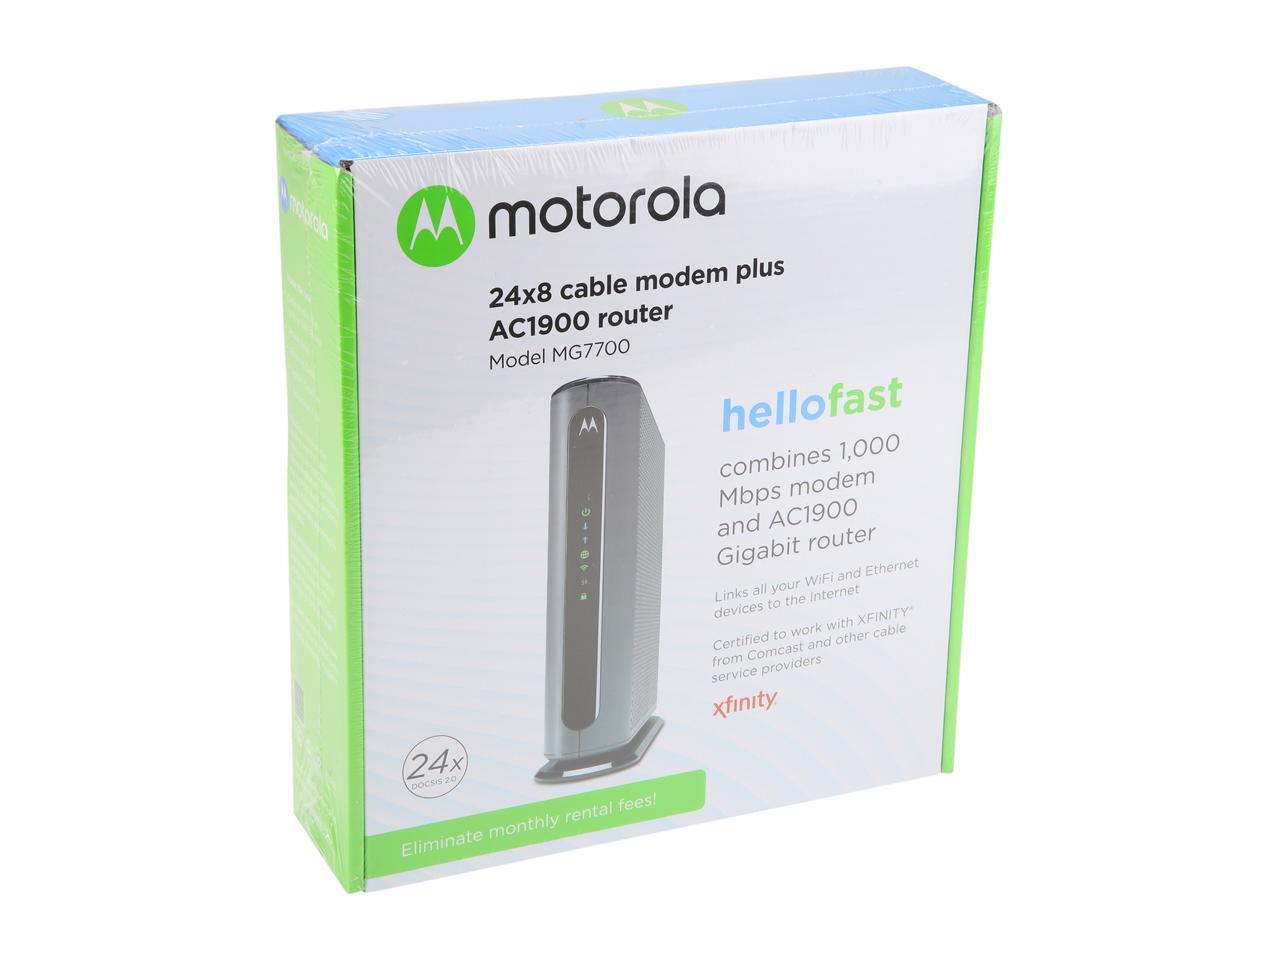 Motorola MG7700 24x8 Cable Modem Plus AC1900 Dual Band WiFi Gigabit Router with Power Boost & Roku Express HD Streaming Media Player 2019 